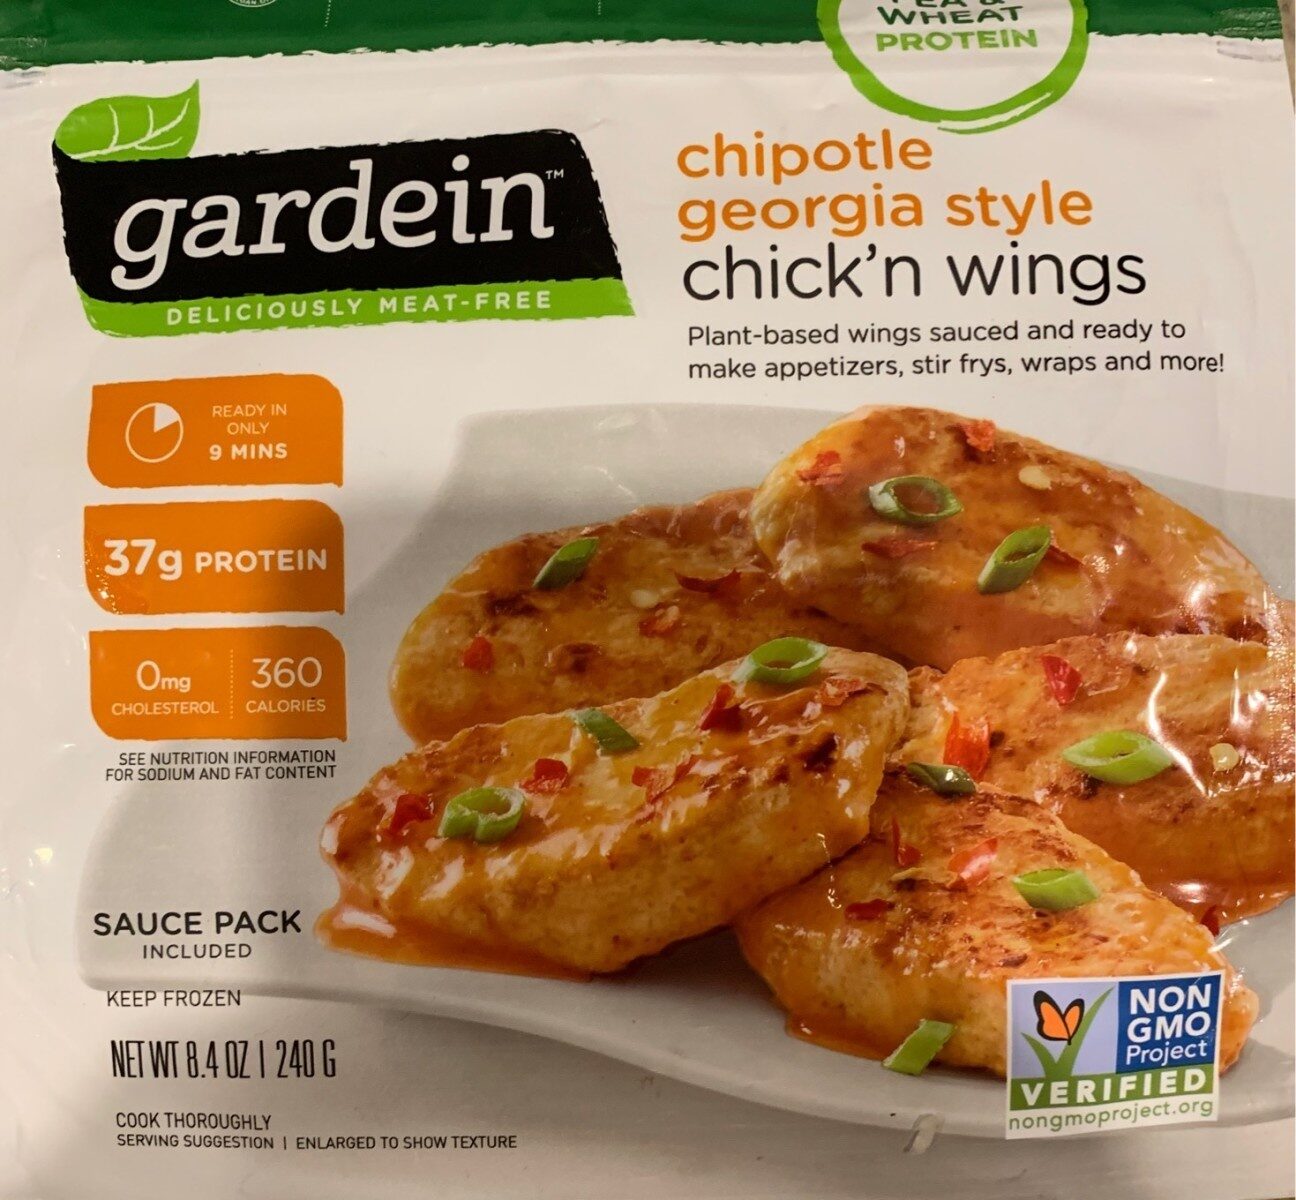 Chipotle Georgia style chick'n wings - Product